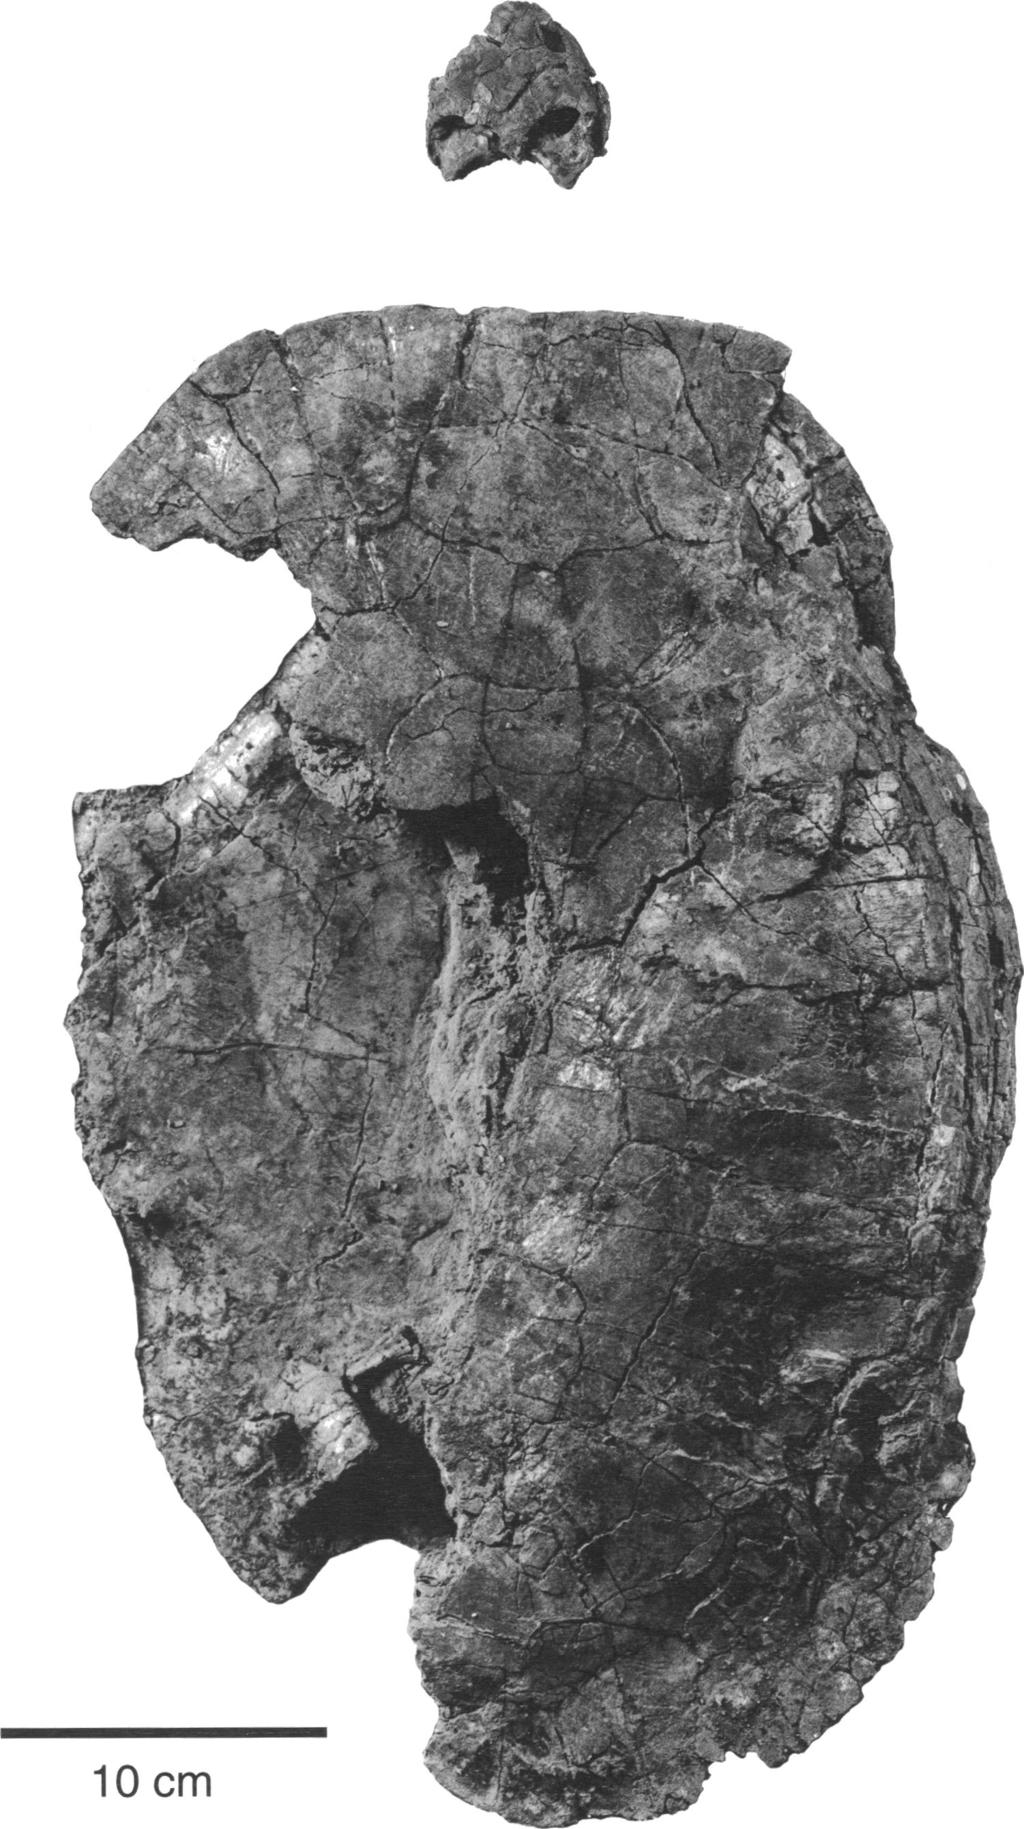 4 AMERICAN MUSEUM NOVITATES NO. 3251 Fig. 1. Foxemys mechinorum, n. gen., n. sp. Skull and carapace (holotype MD t 10) in dorsal view.